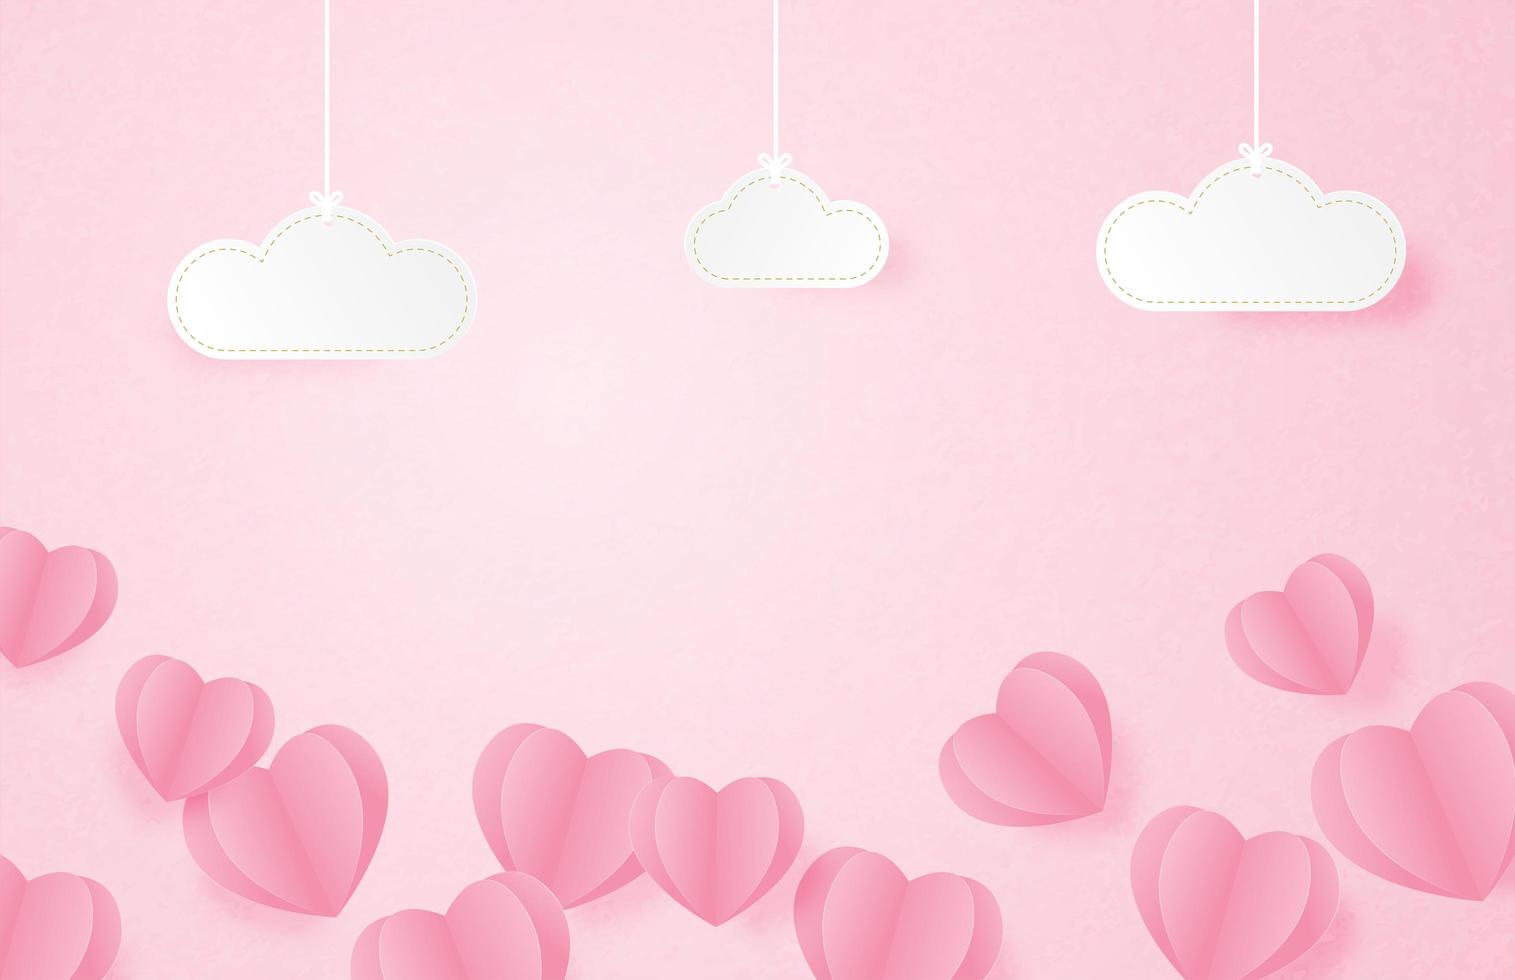 Valentine's day banner with heart shapes and clouds vector